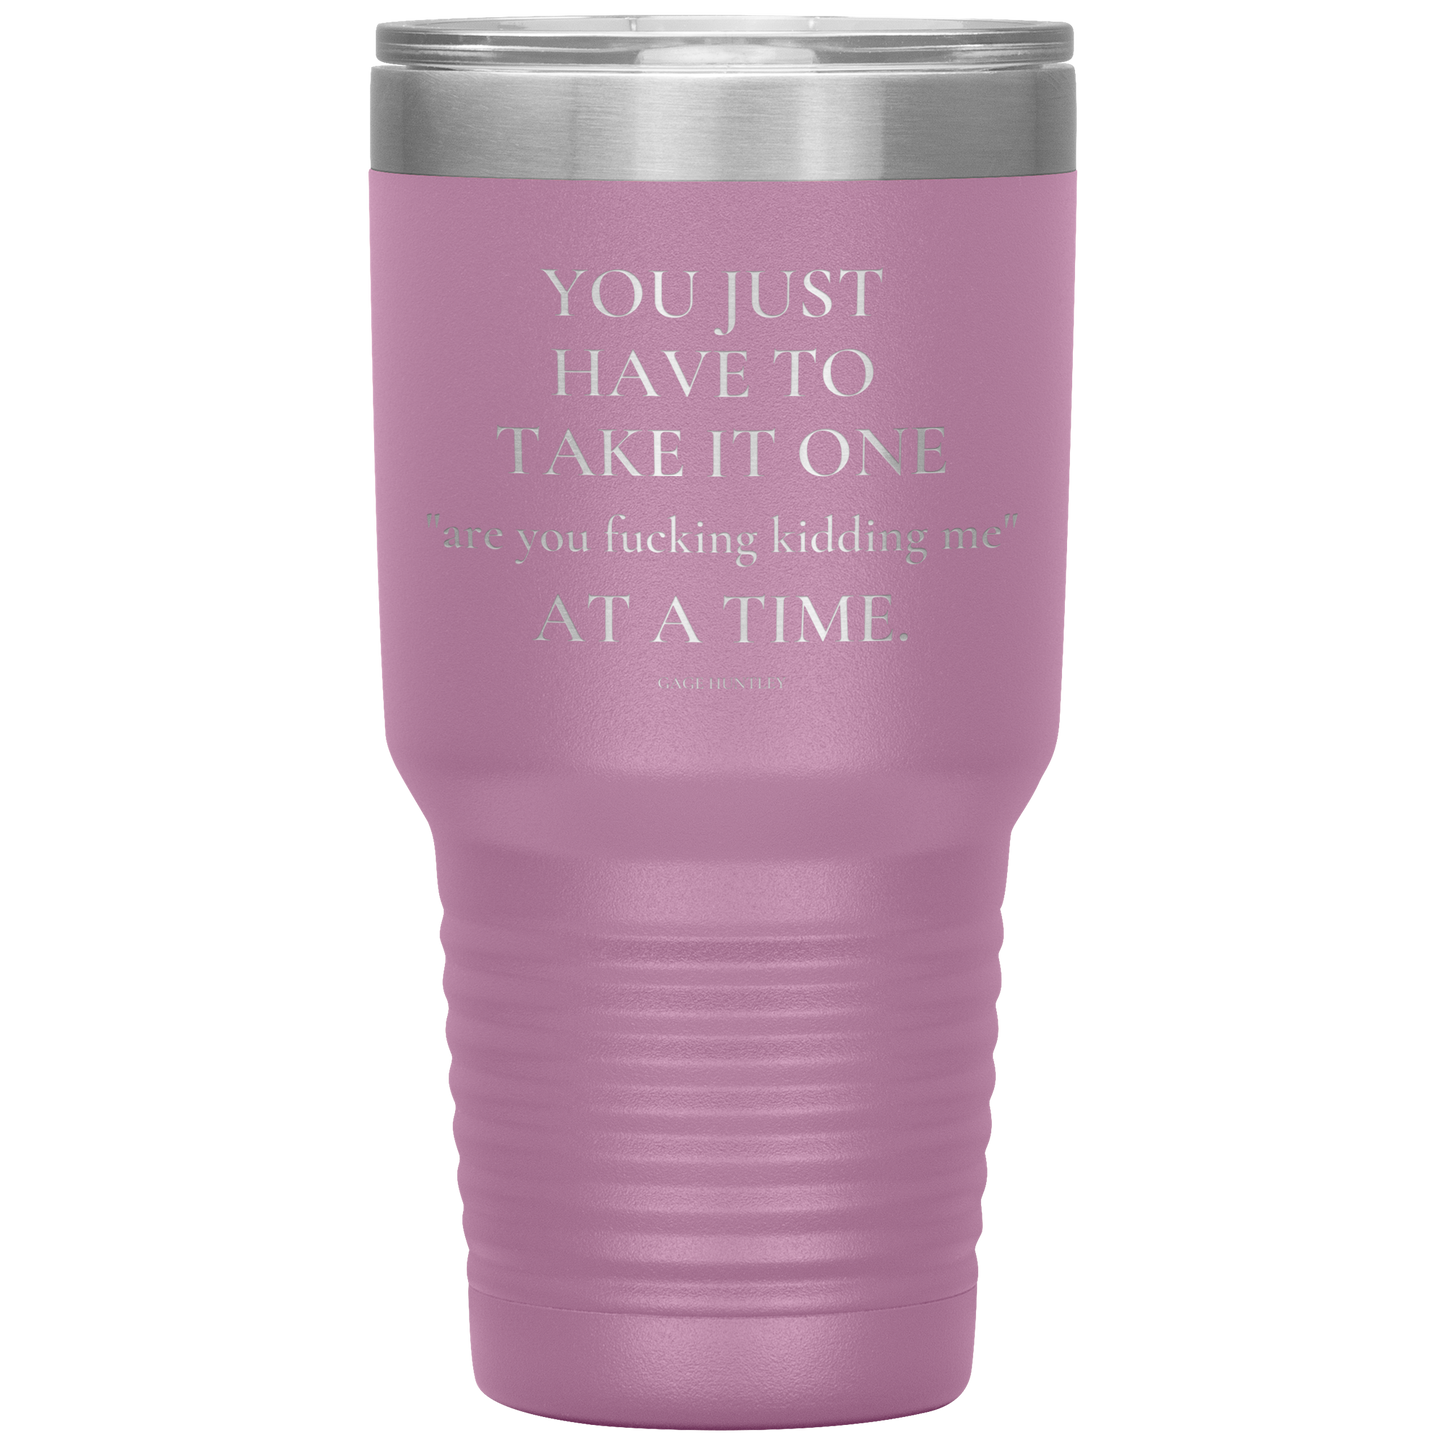 Are You Kidding Me- 30 Ounce Tumbler